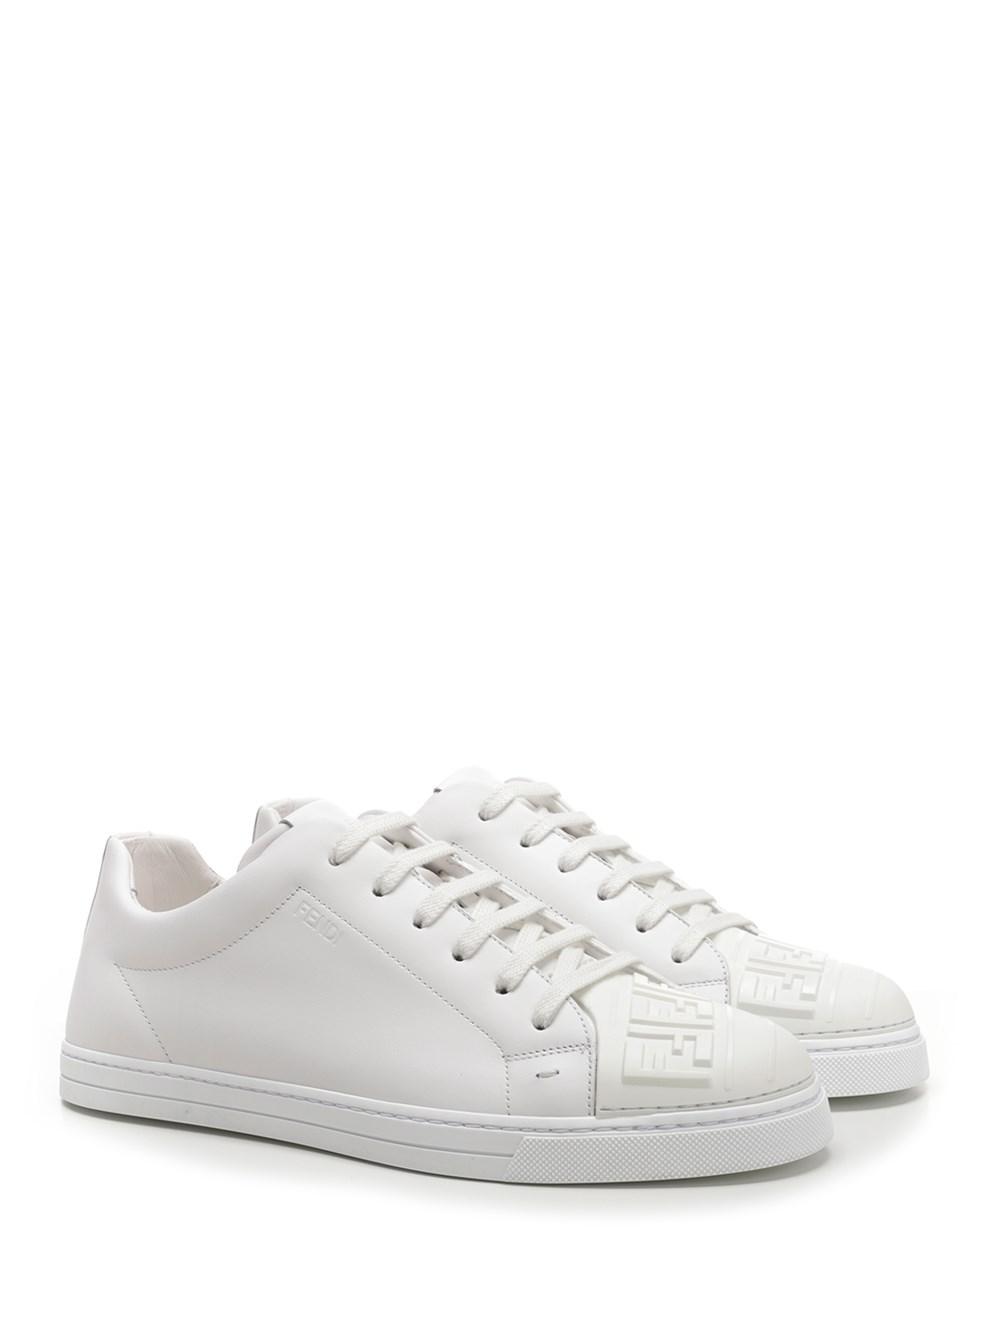 Fendi Leather White Sneakers With Logo for Men - Lyst